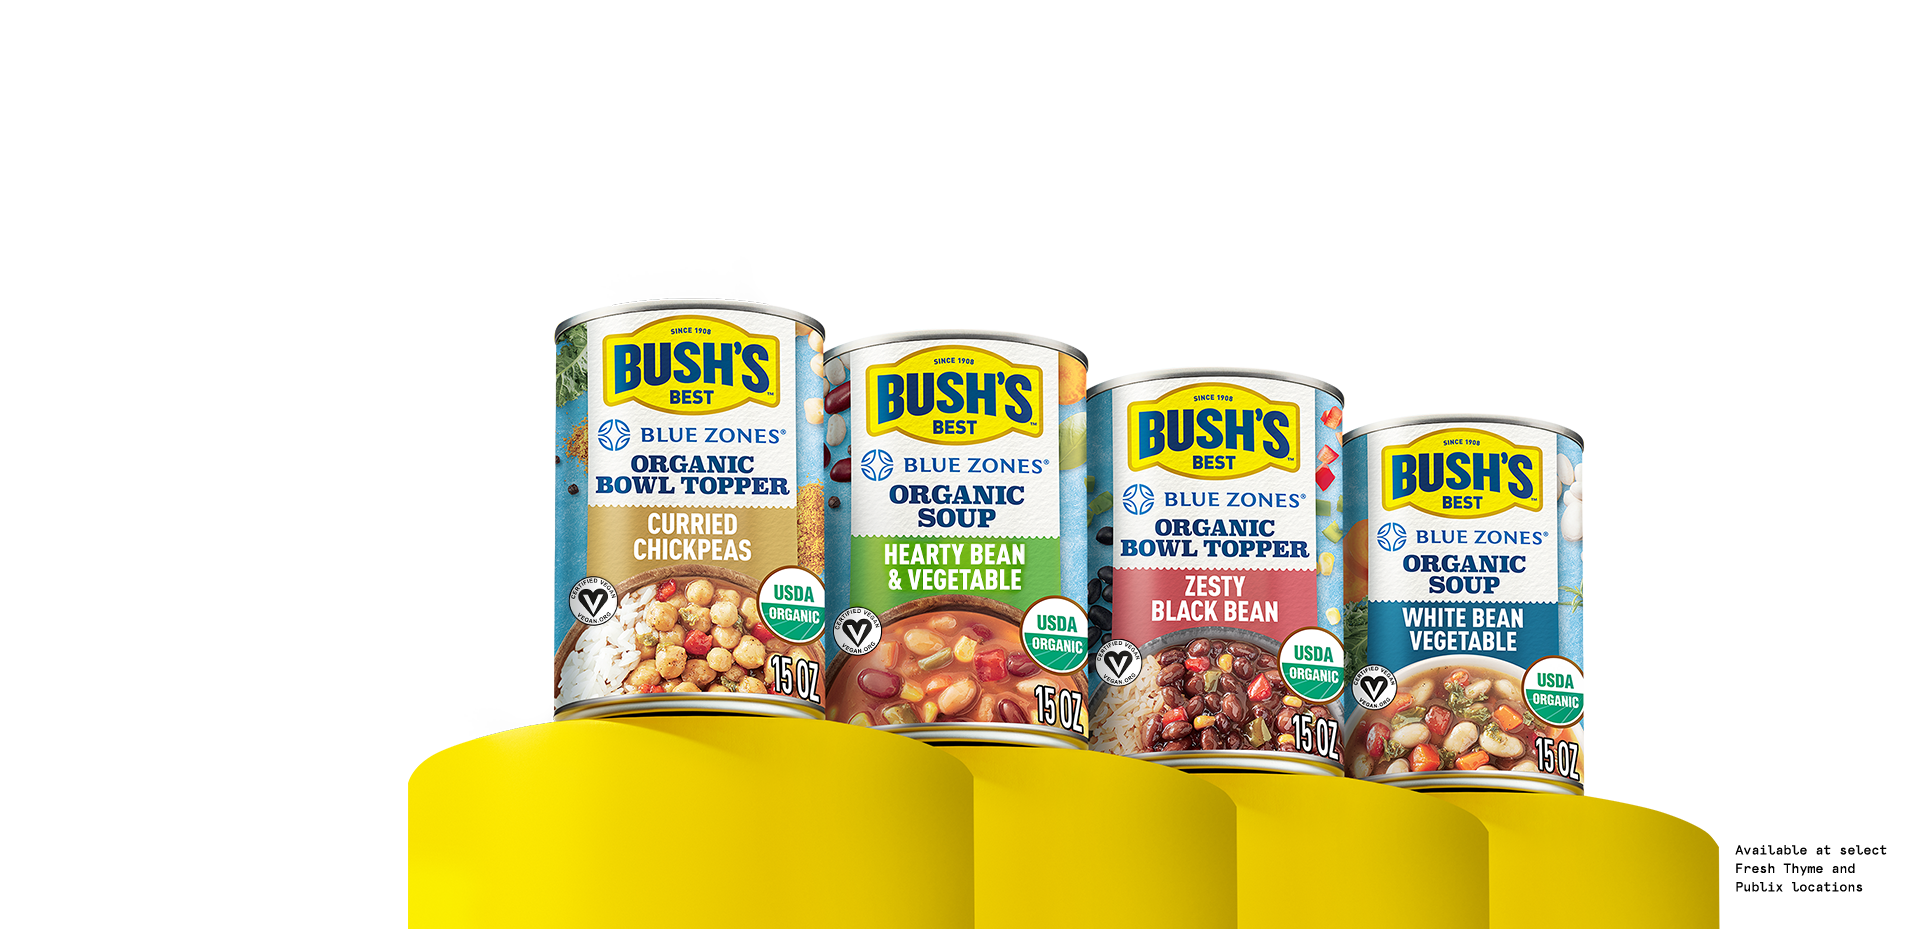 Several cans of Bush's Beans Blue Zones style beans on yellow pedestals.